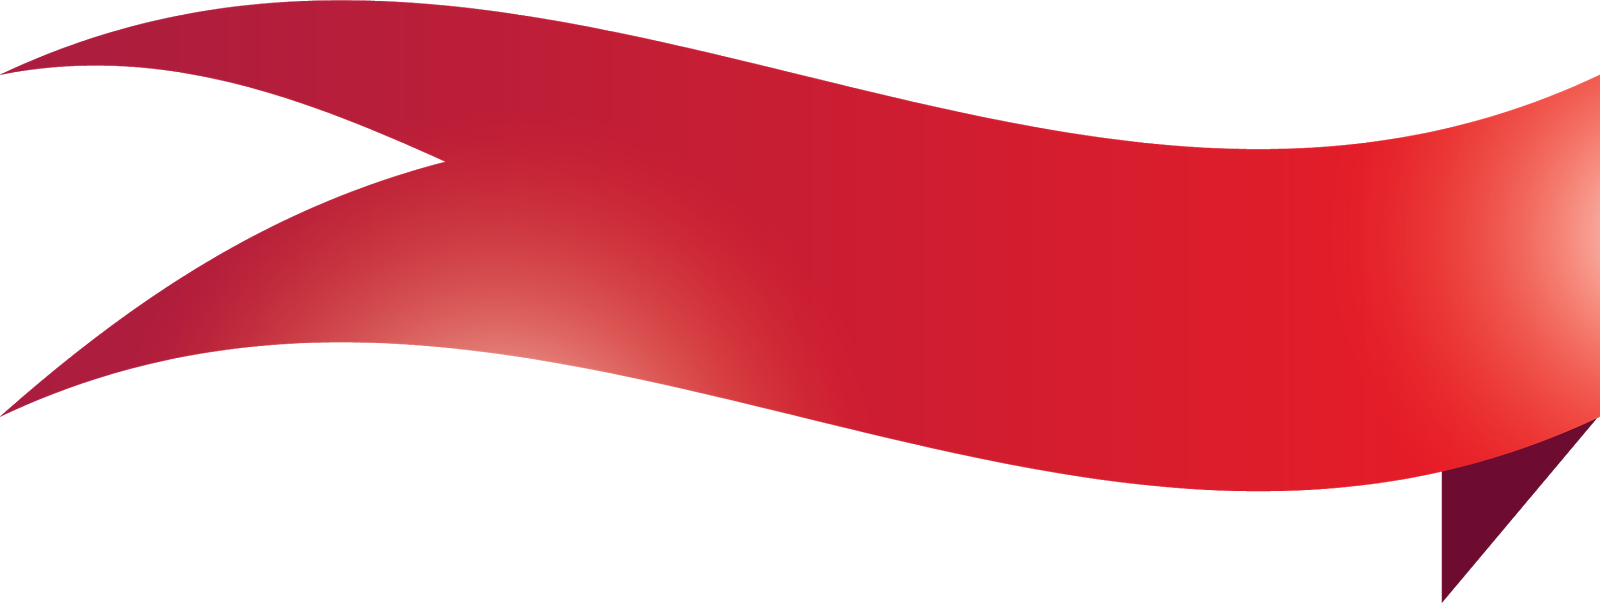 Red Wavy Banner Graphic PNG image